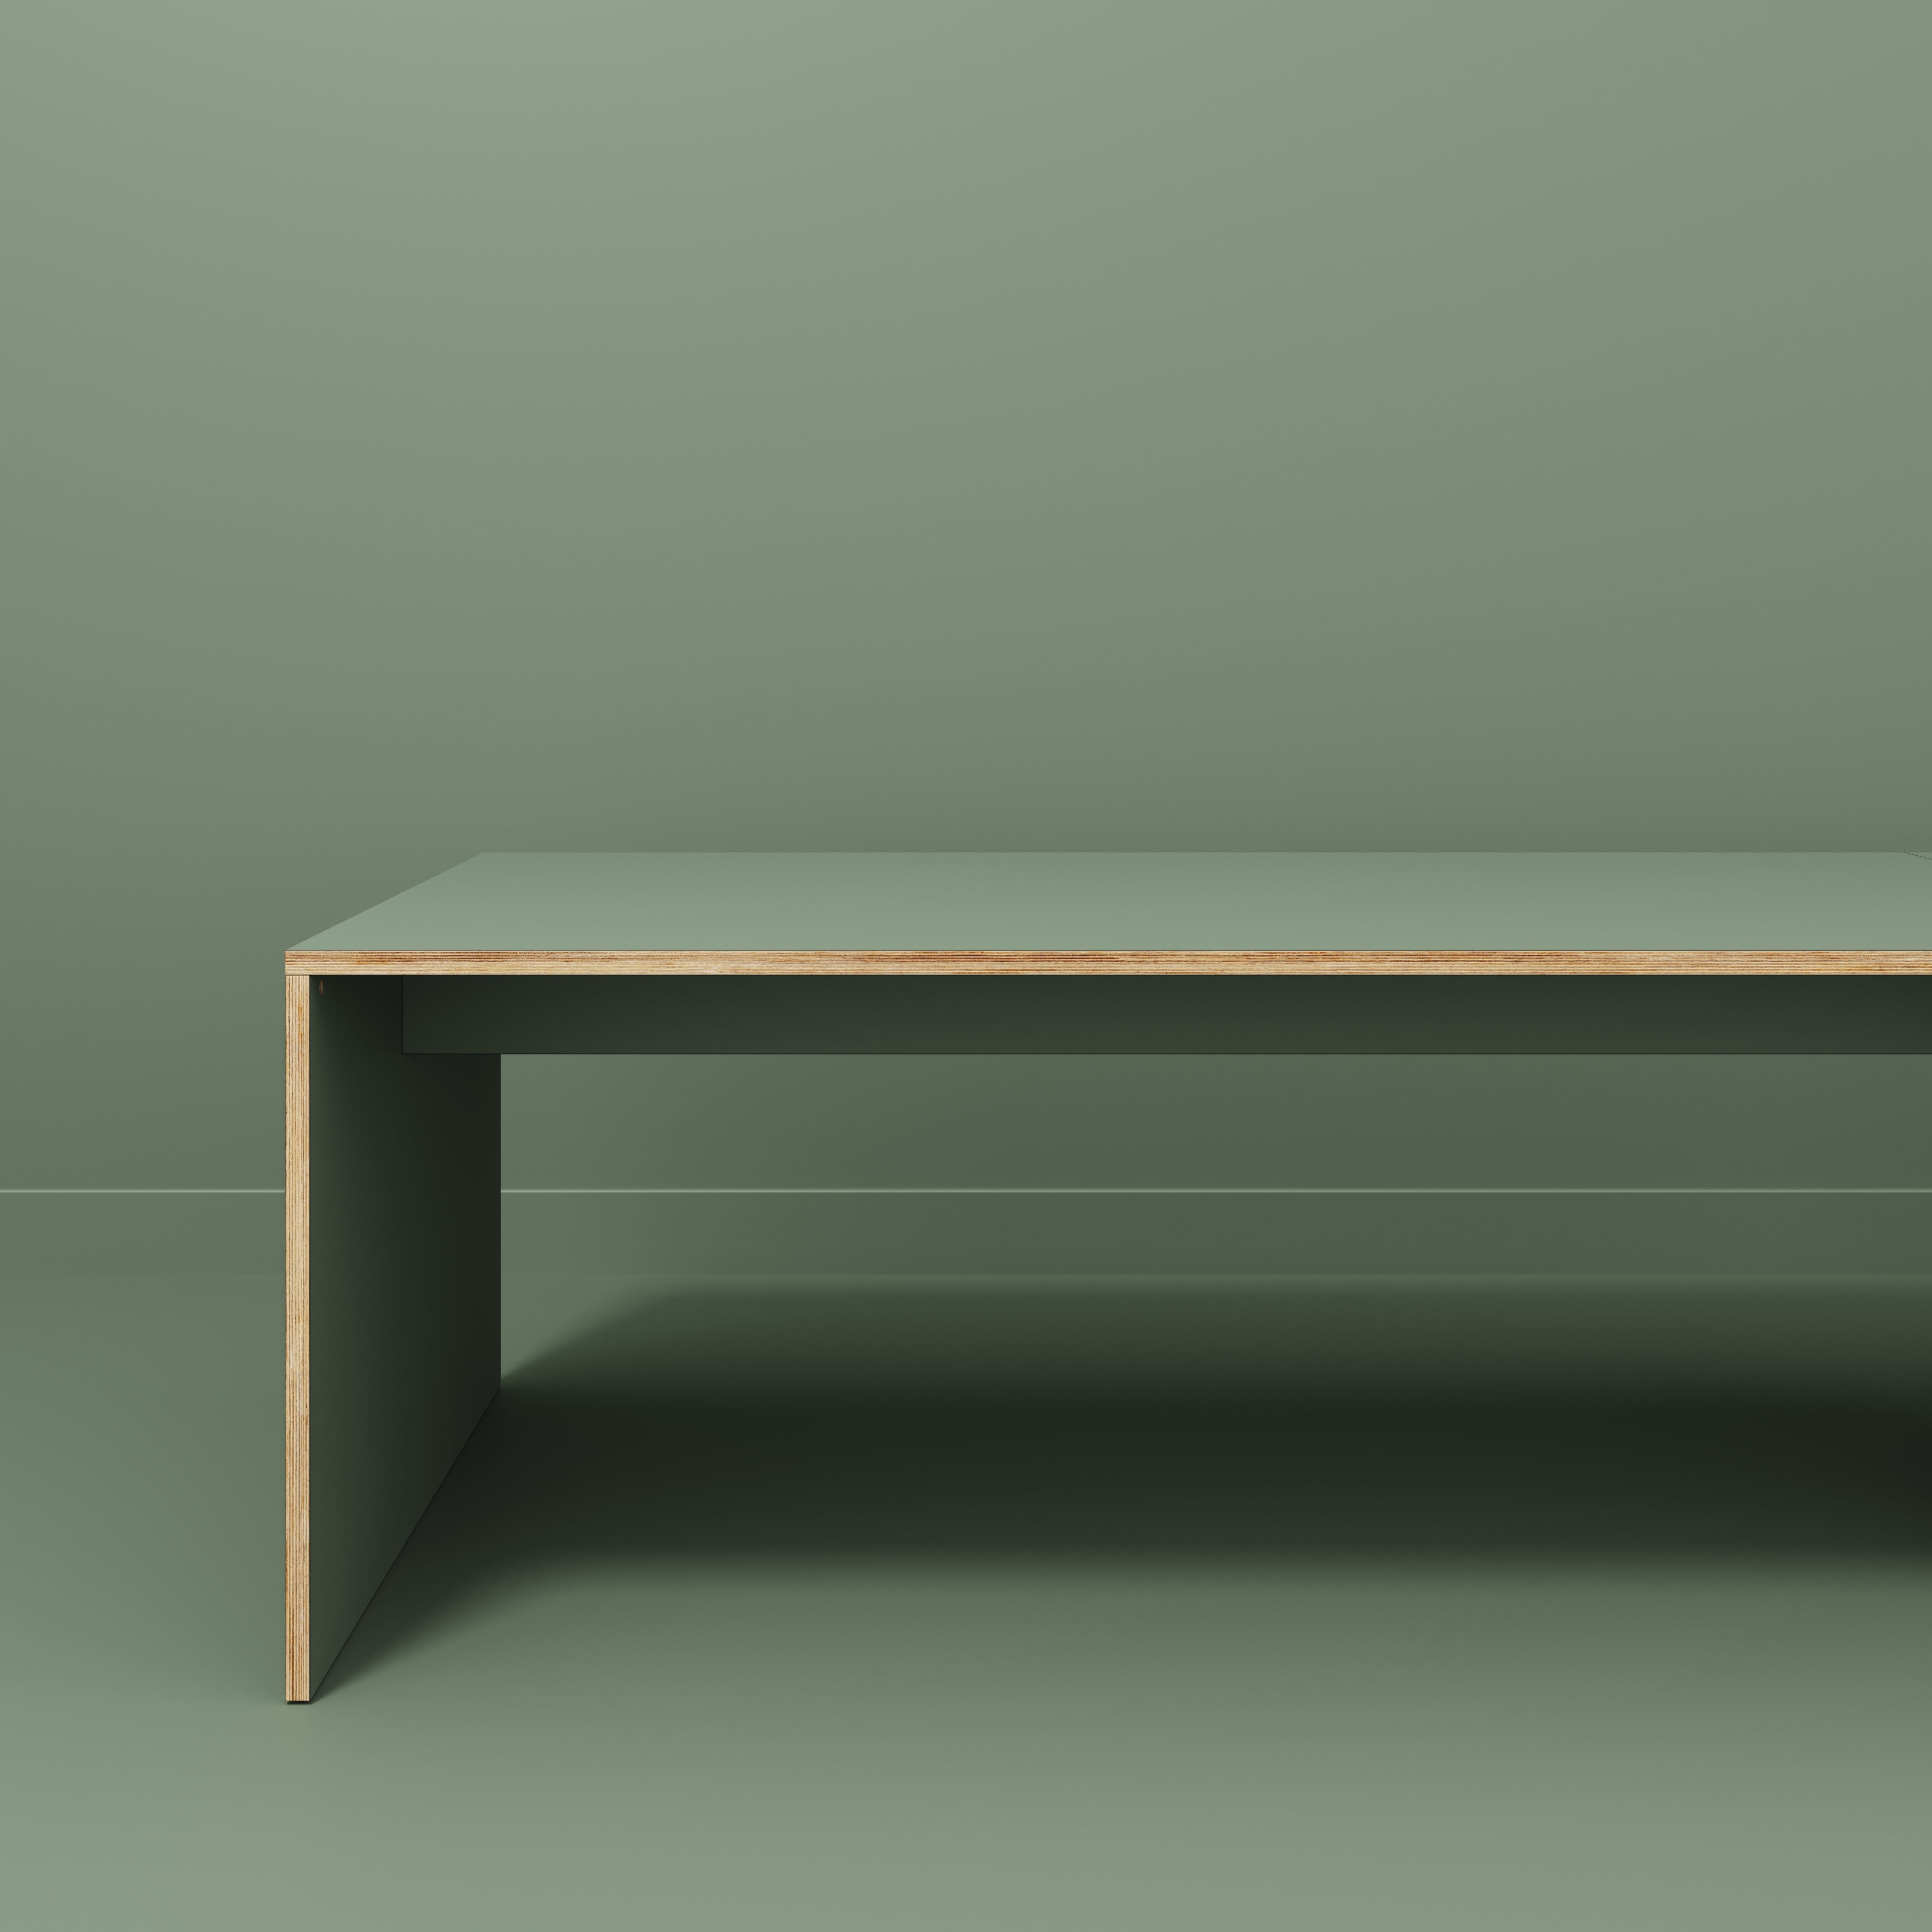 Table with Solid Sides - Formica Green Slate - 5600(w) x 1000(d) x 735(h)